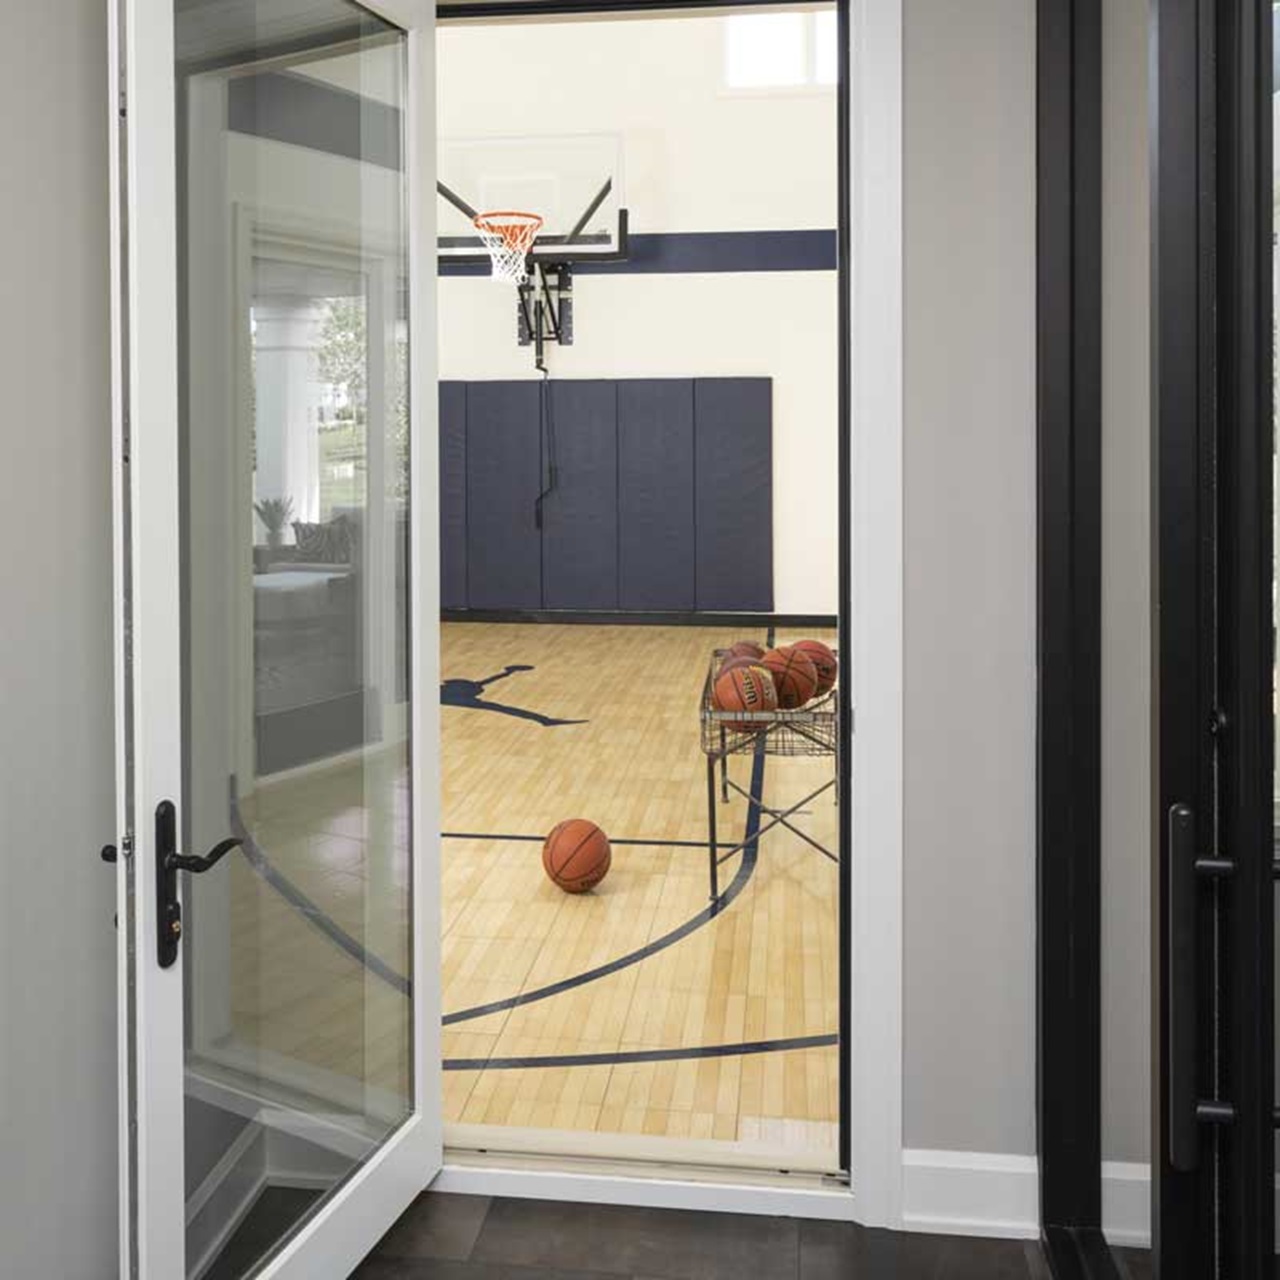 View through a swinging patio door into a home gym basketball court